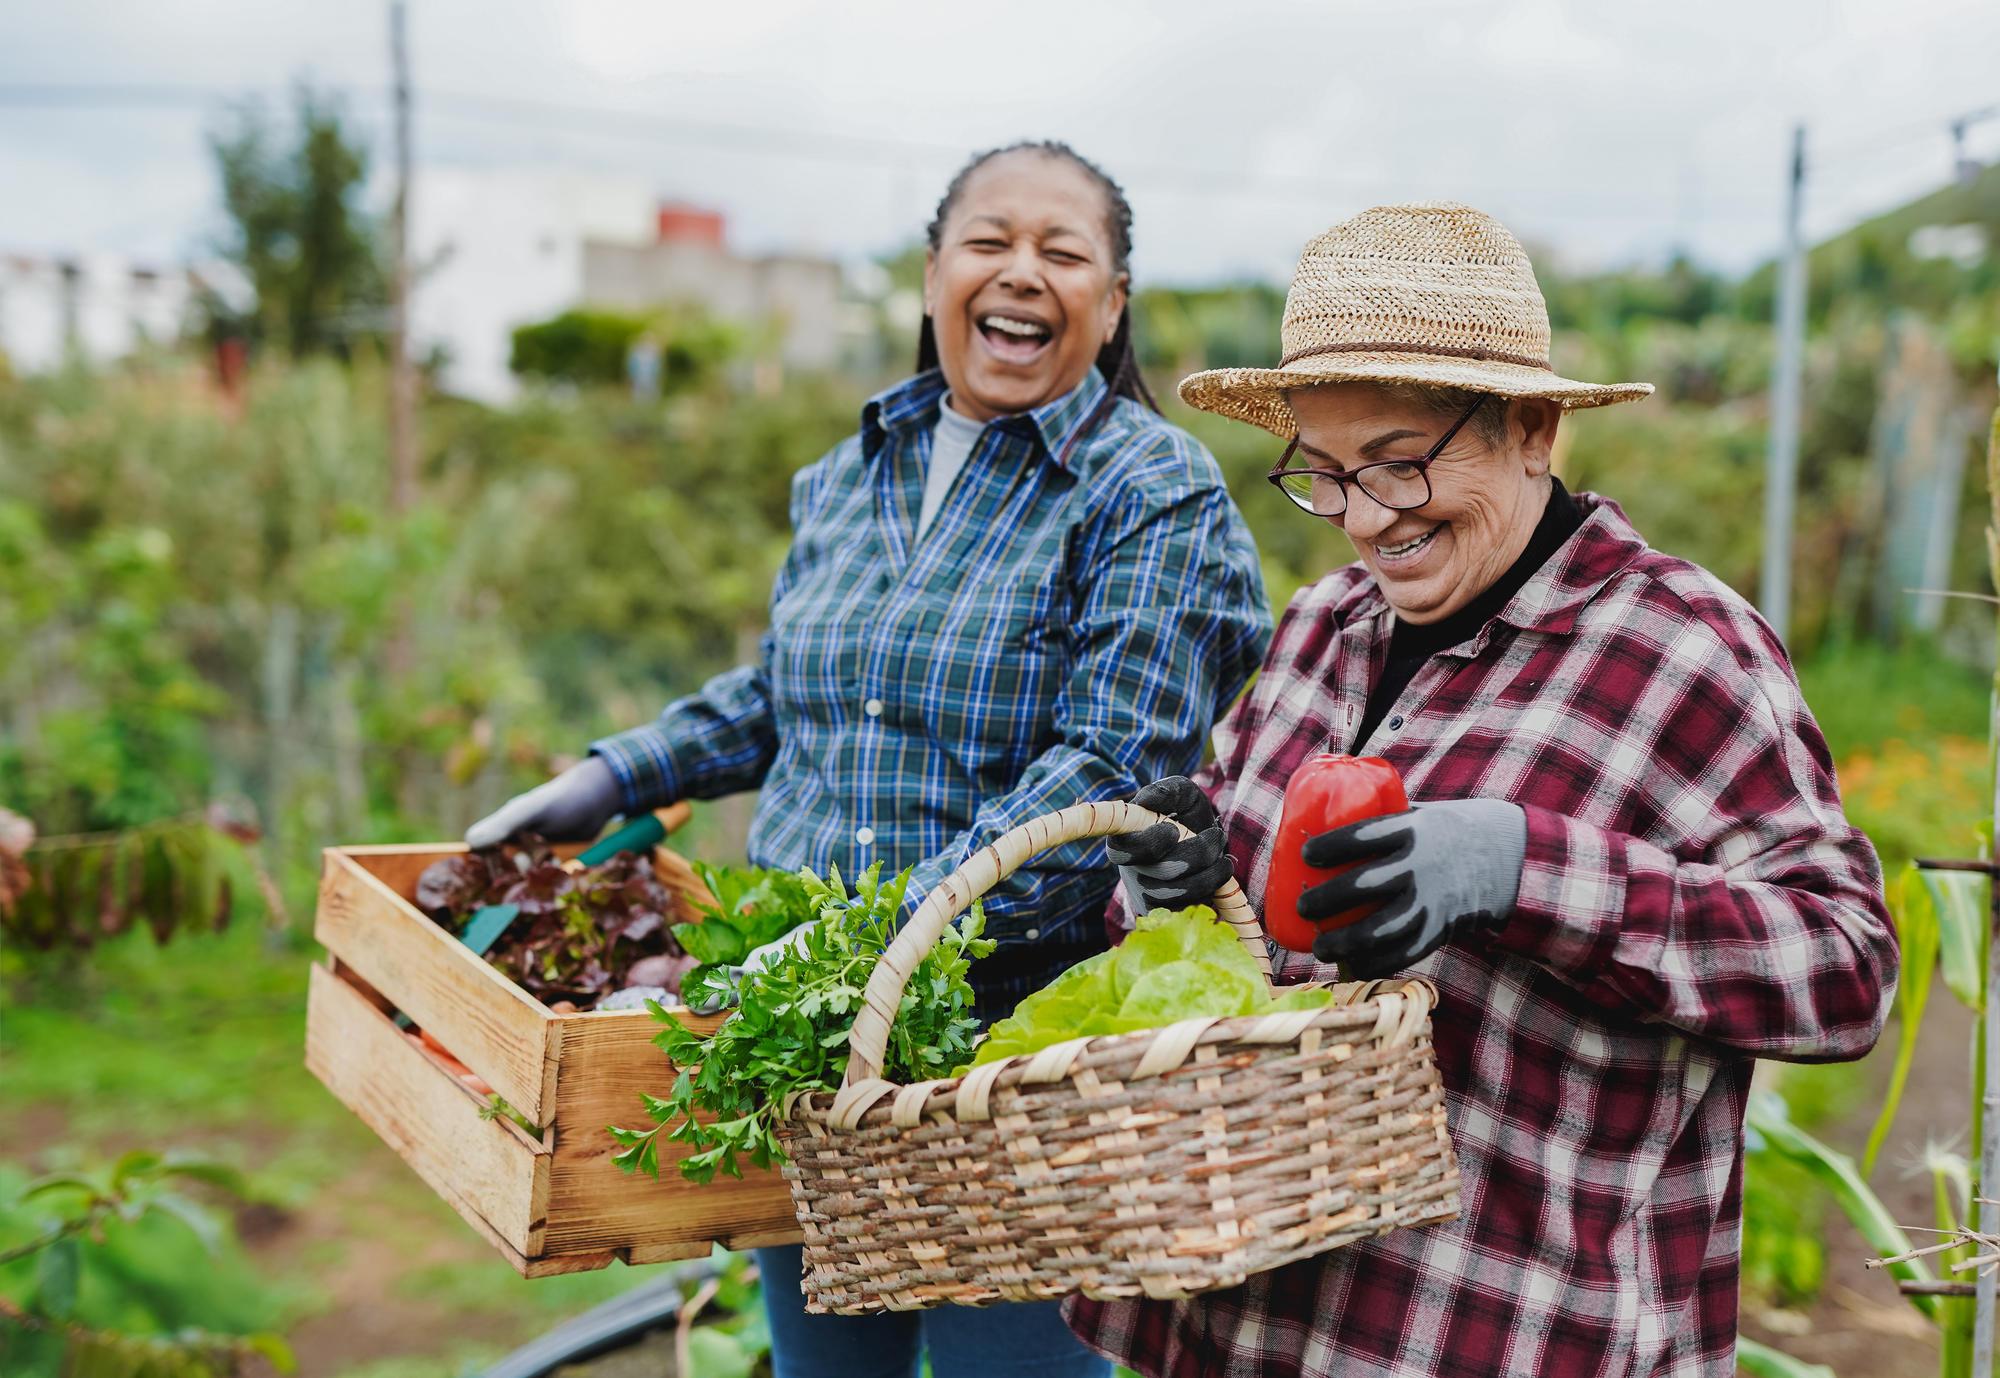 two people smiling in garden carrying freshly picked produce boxes